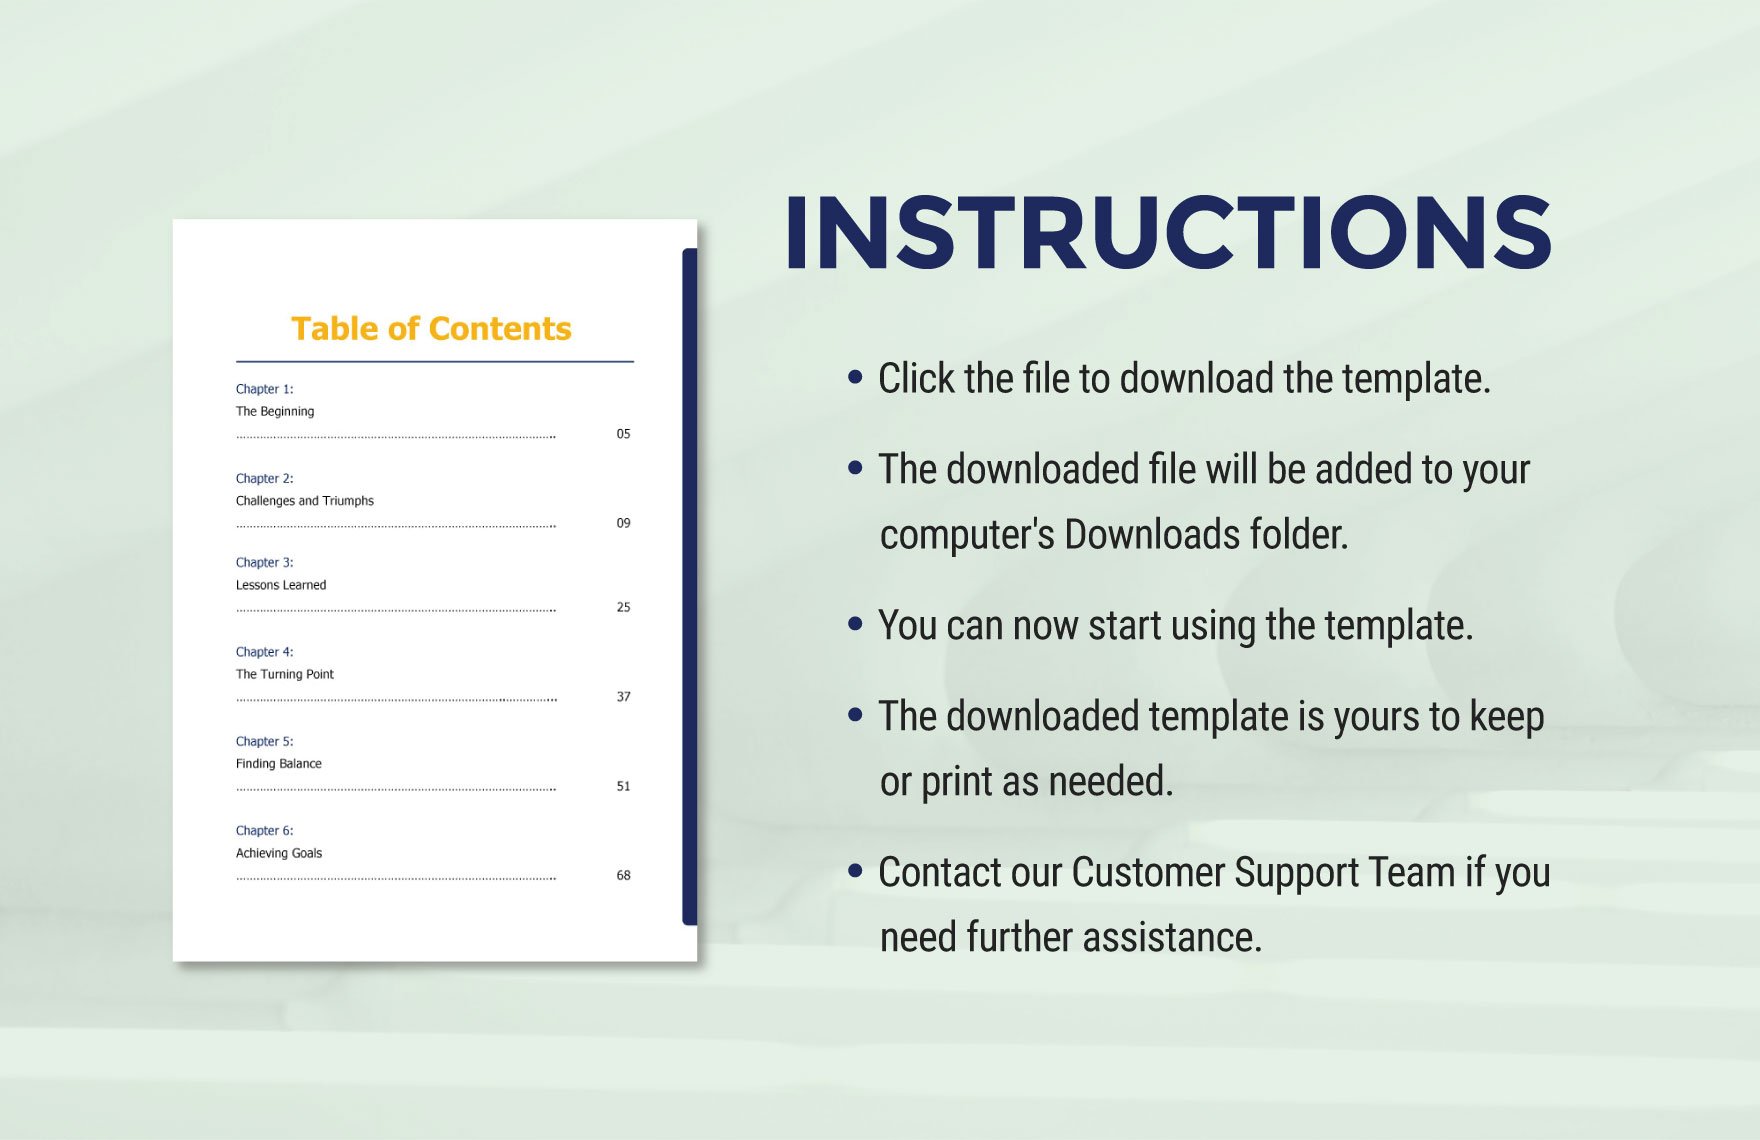 Book Table of Contents Template